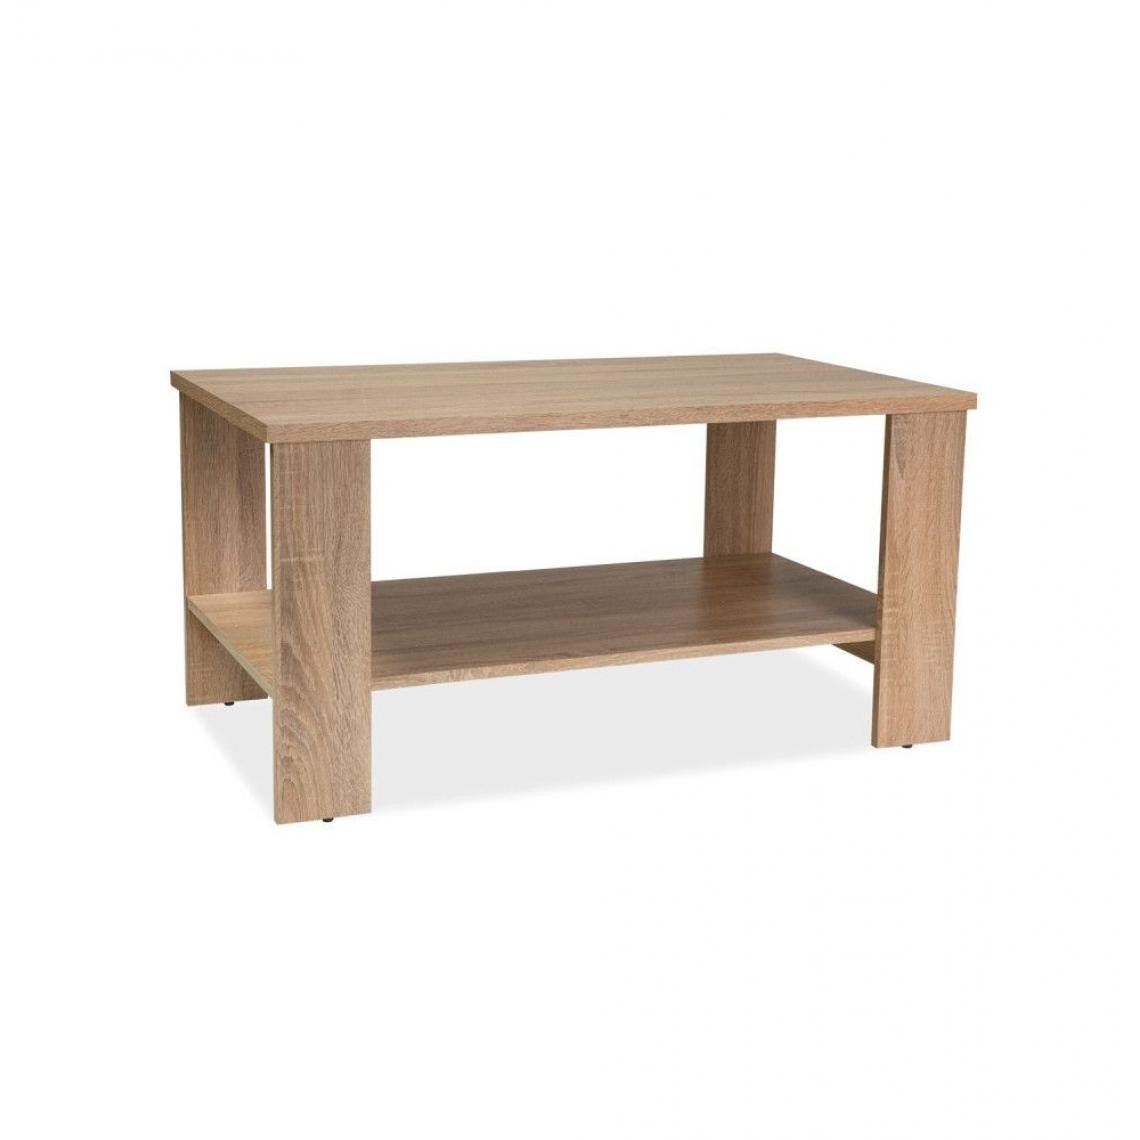 Ac-Deco - Table basse en bois - L 100 cm x l 55 cm x H 50 cm - Sara - Beige - Tables basses